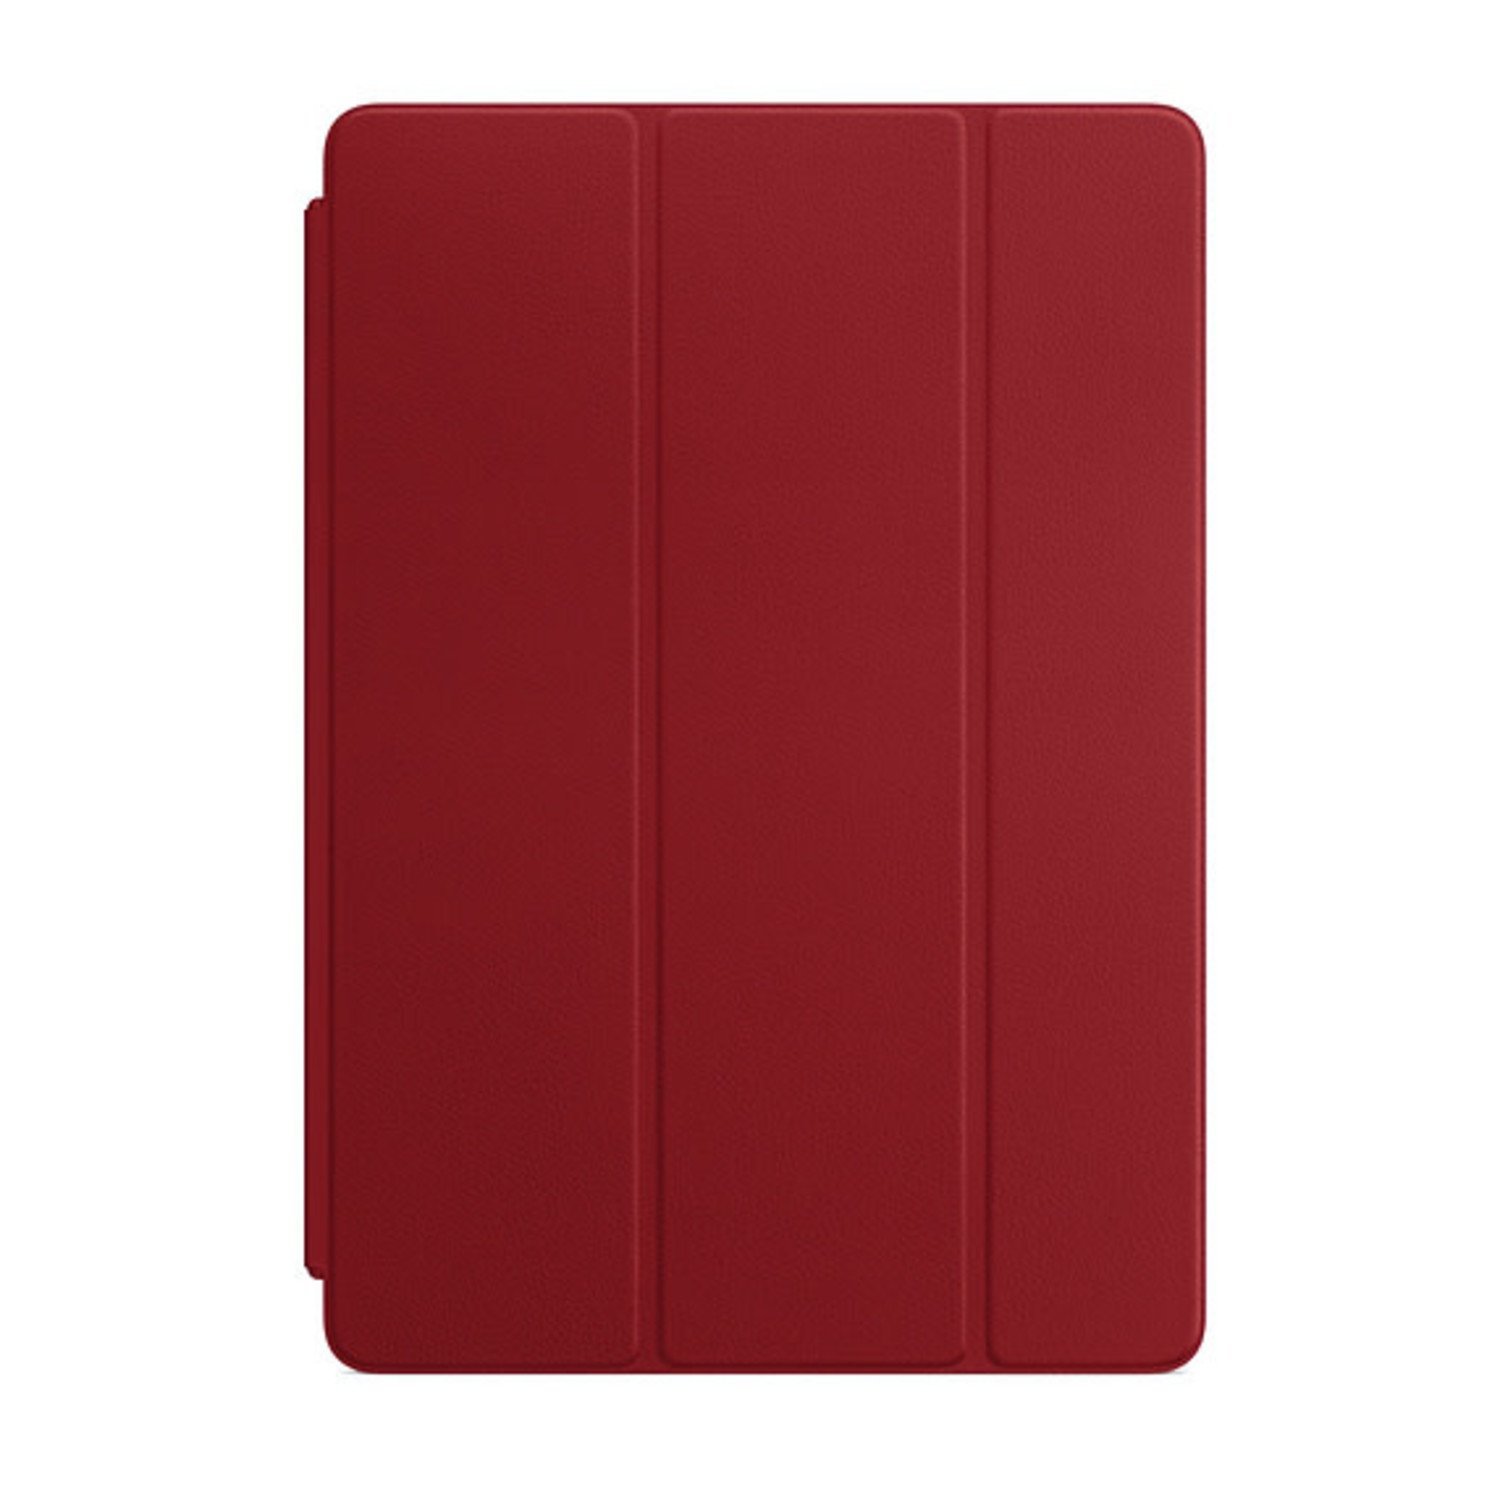 Smart Cover for iPad (7th generation) and iPad Air (3rd - kite+key, Rutgers Store